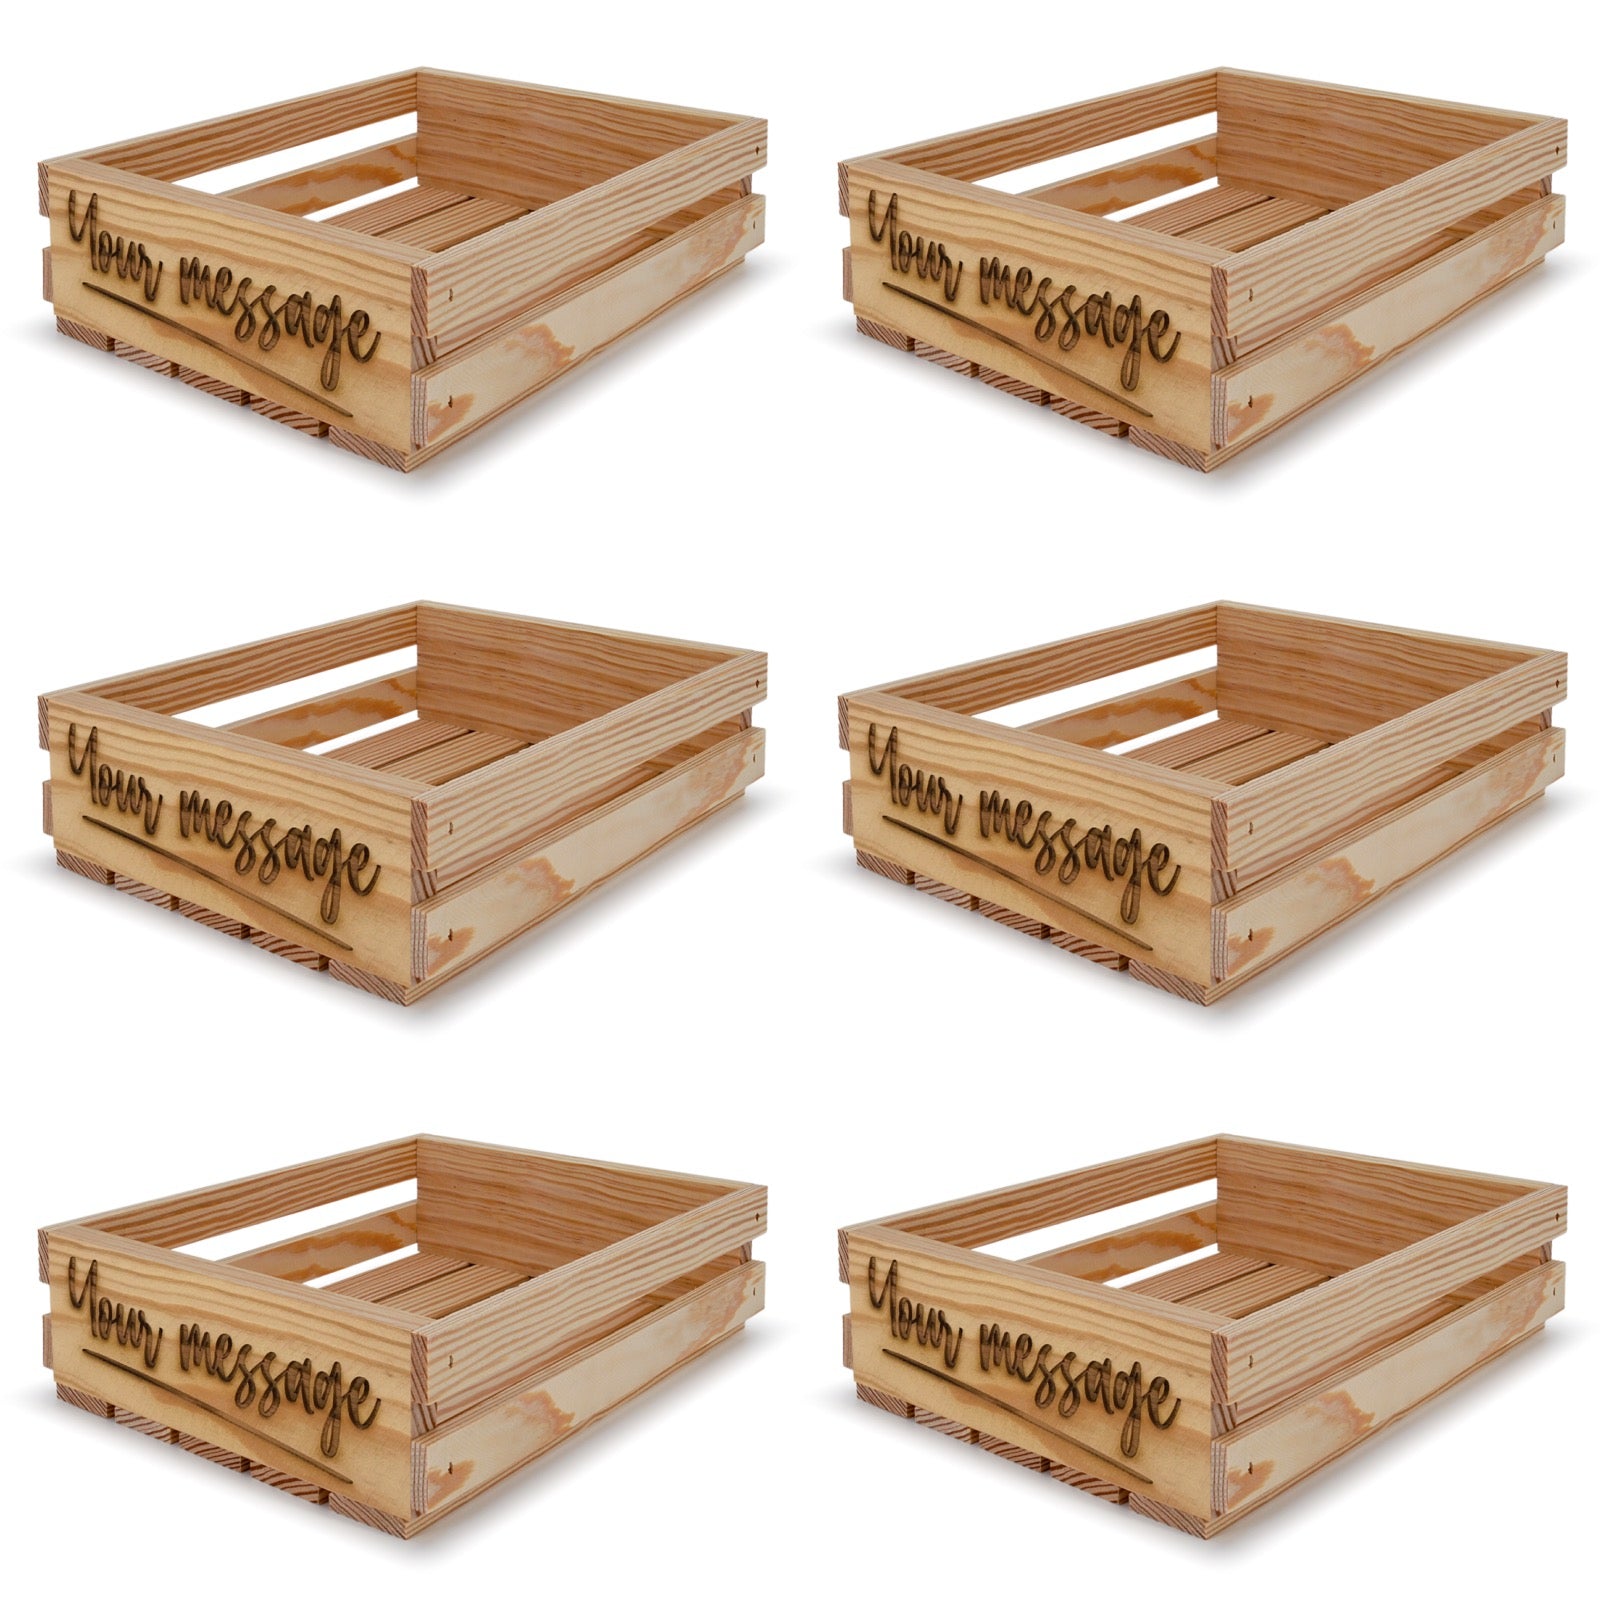 6 Small wooden crates 12x10x3.5 your message included